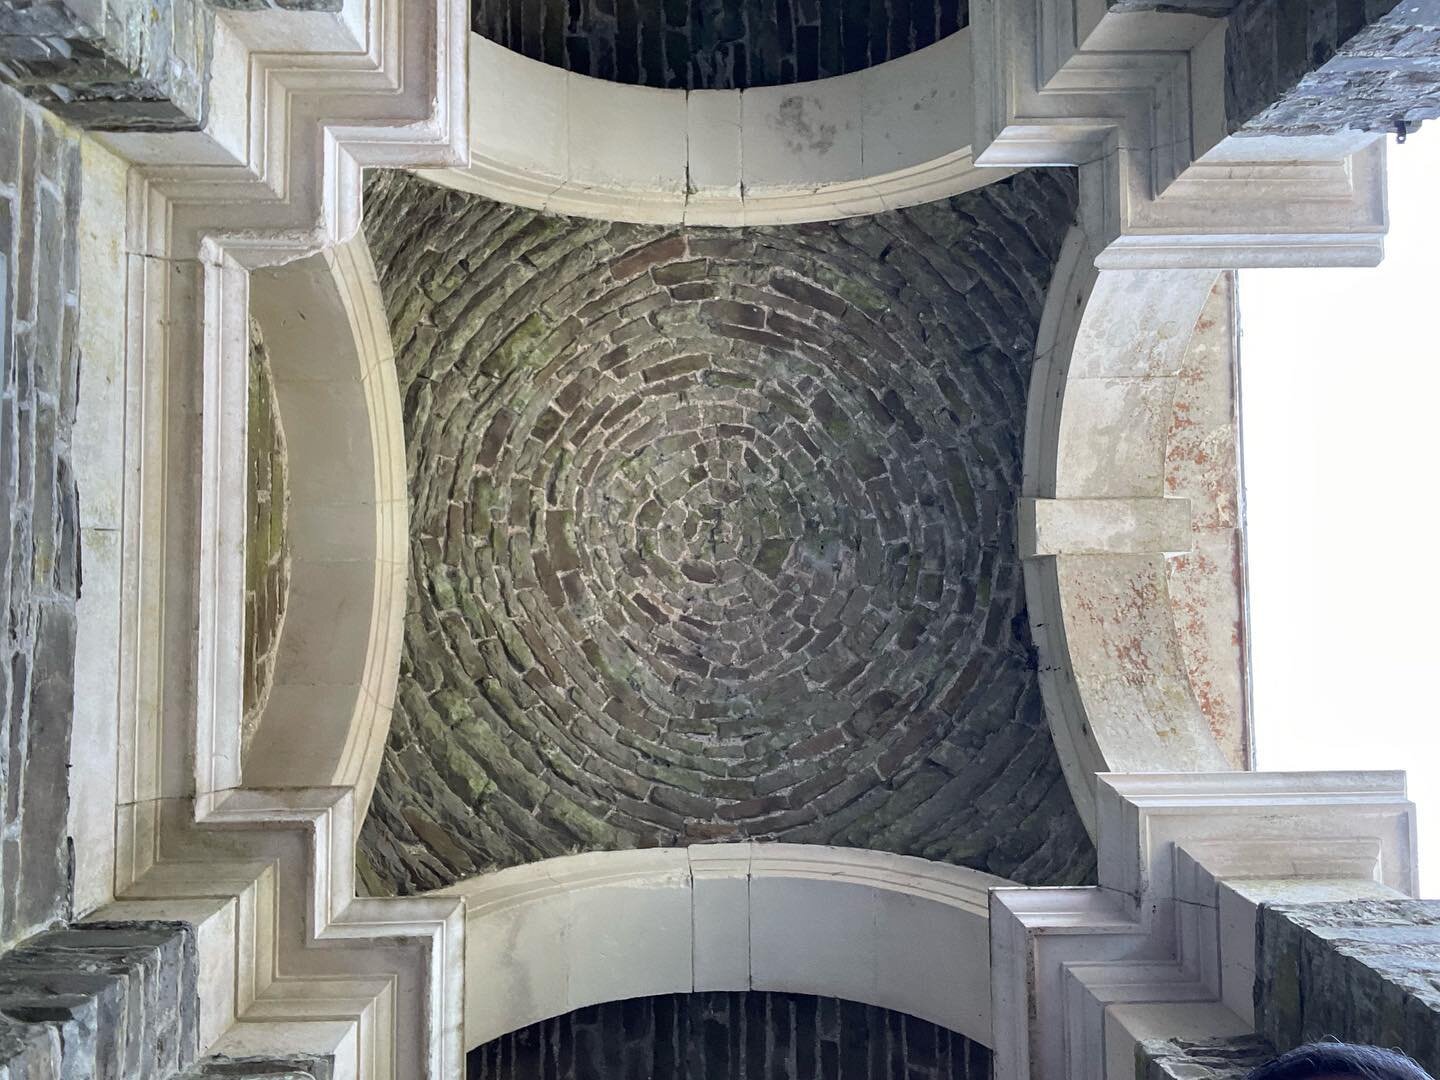 The ceiling of the custom pavilion at Heywood Gardens designed by legendary architect Sir Edwin Lutyens.
.
.
.
#architecturaldelight #lutyens #edwinlutyens #siredwinlutyens @lutyens_trust_america @lutyens.trust